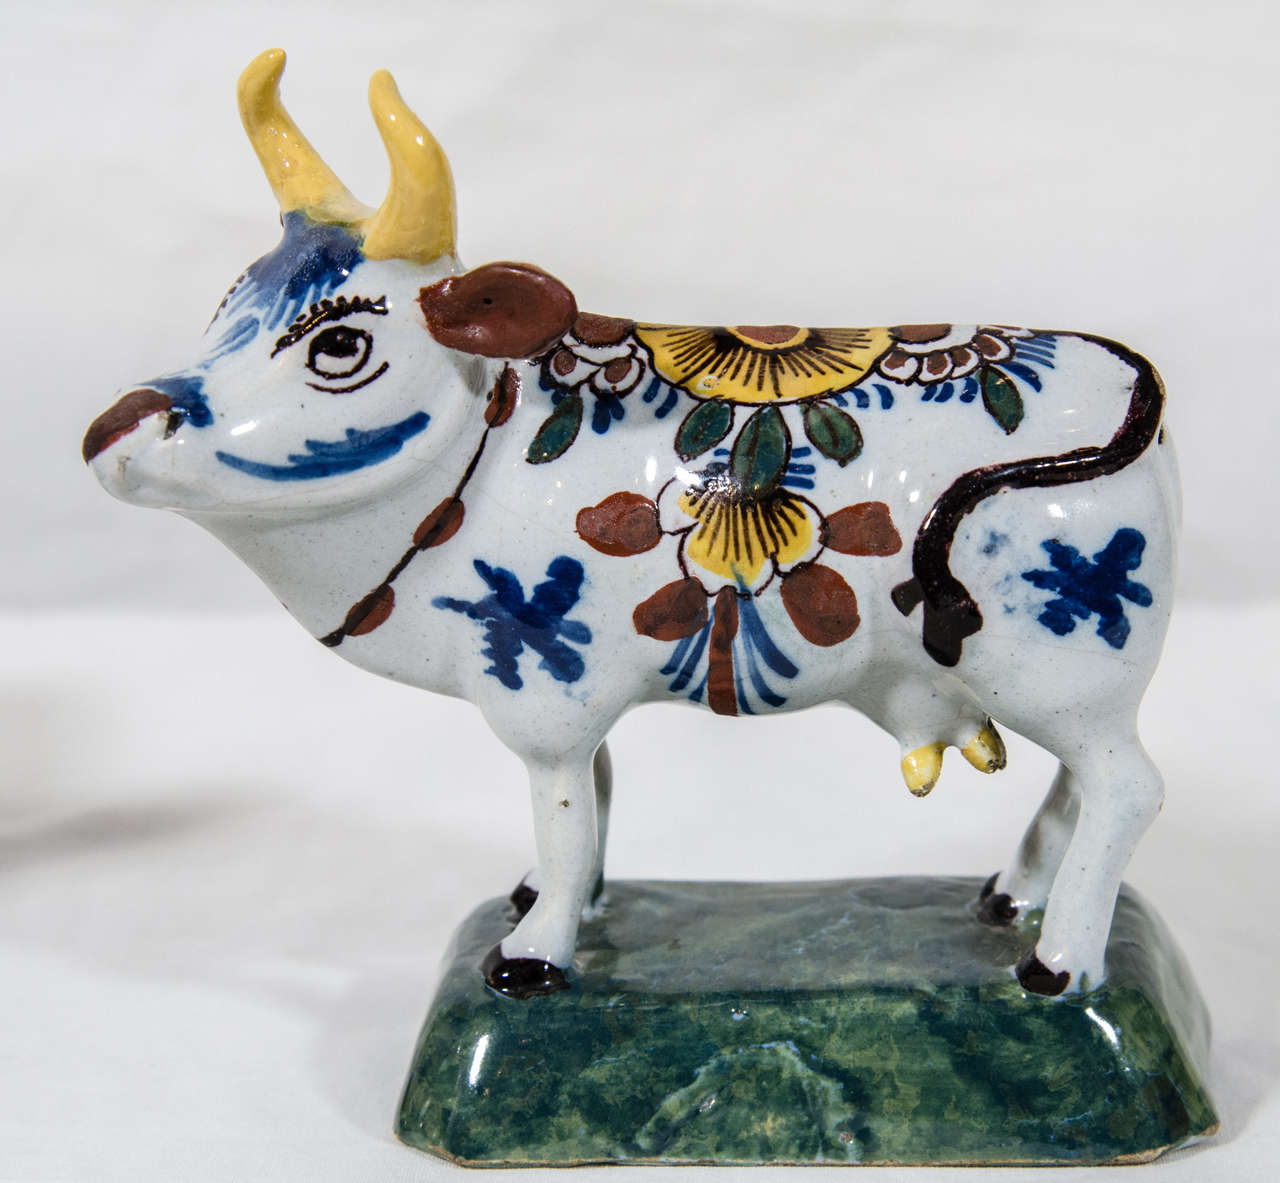 A pair of endearing 18th century Dutch Delft cows each painted with foliage, flowers, and markings in polychrome colors of yellow, iron red, and  cobalt blue. They stand foresquare on raised  green rectangular bases .